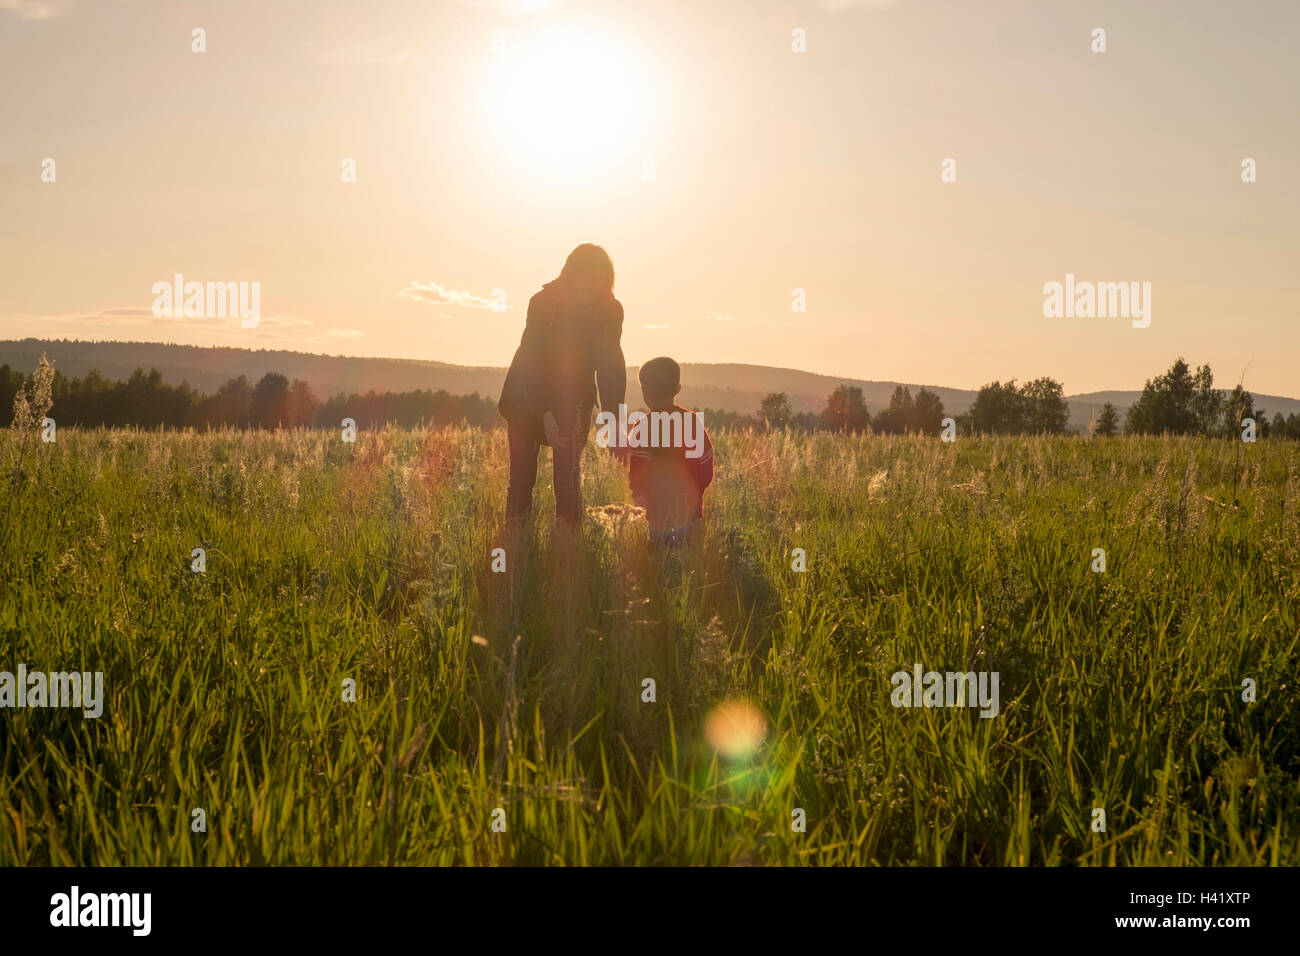 Femme et son standing in field at sunset Banque D'Images